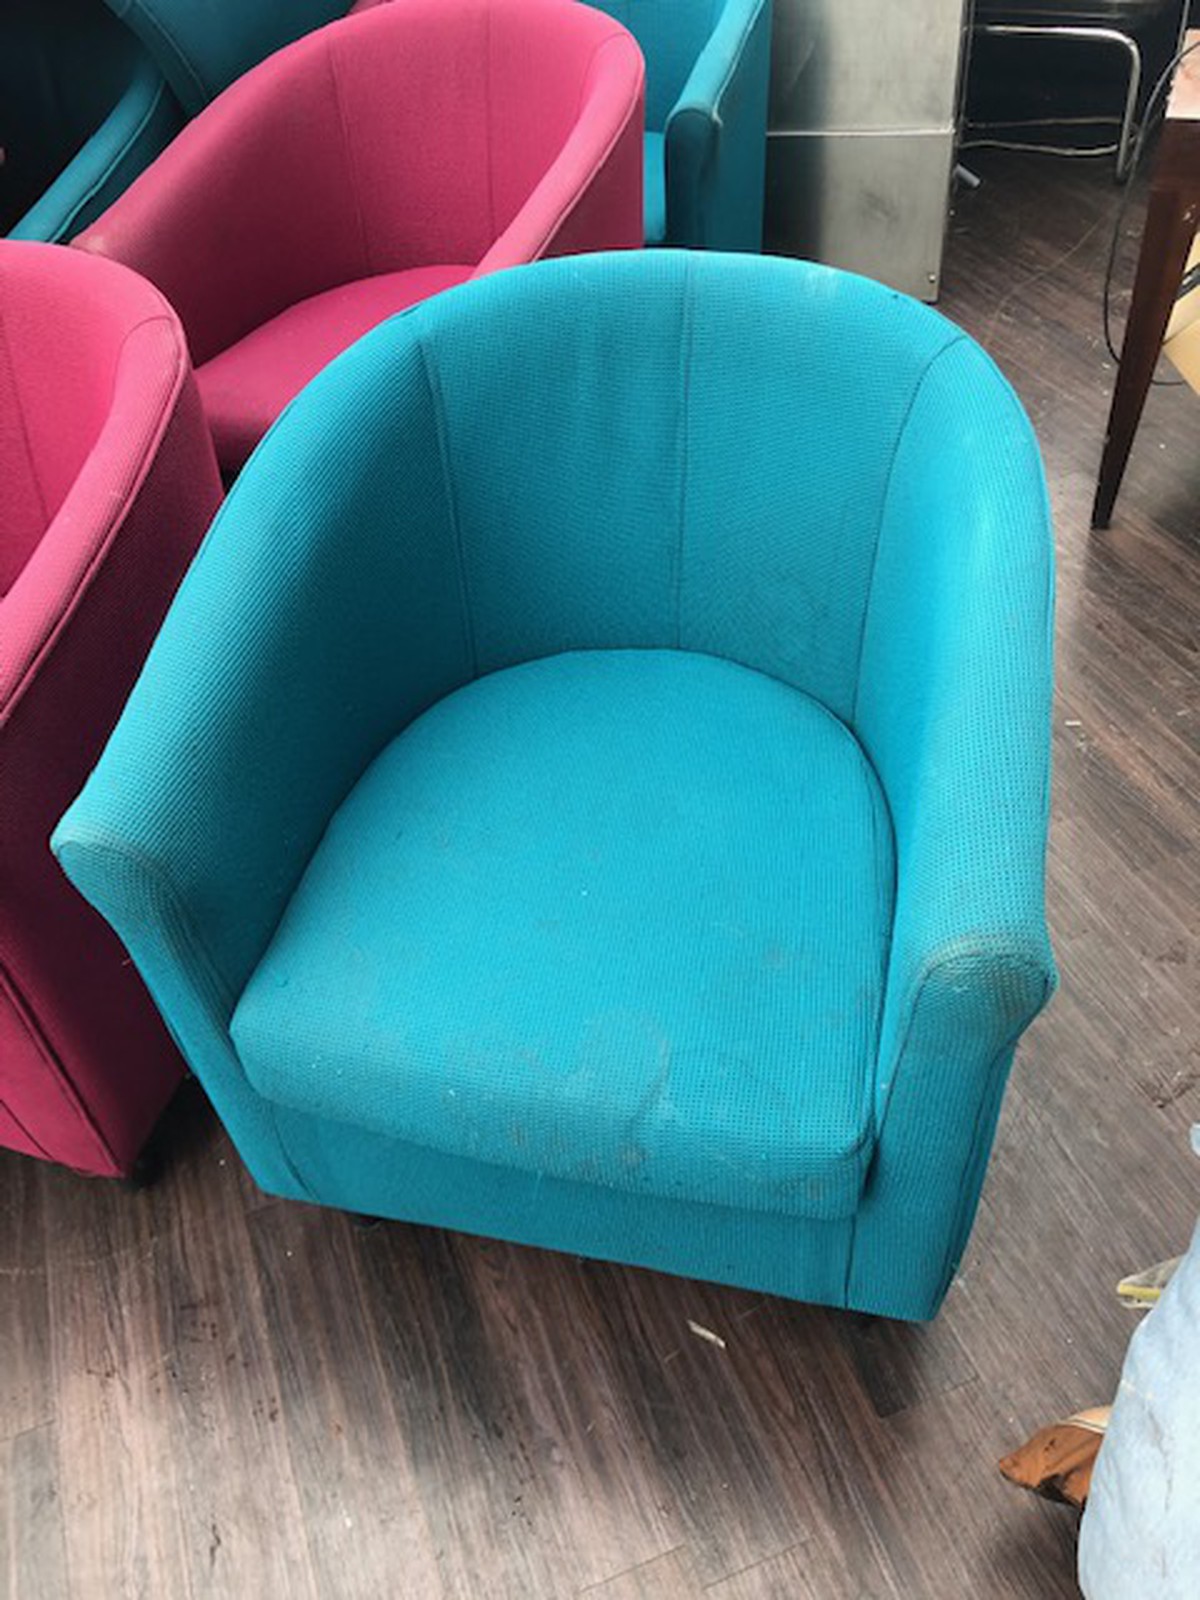 9x tub chairs 2 colours blue and dark pink  newhaven sussex